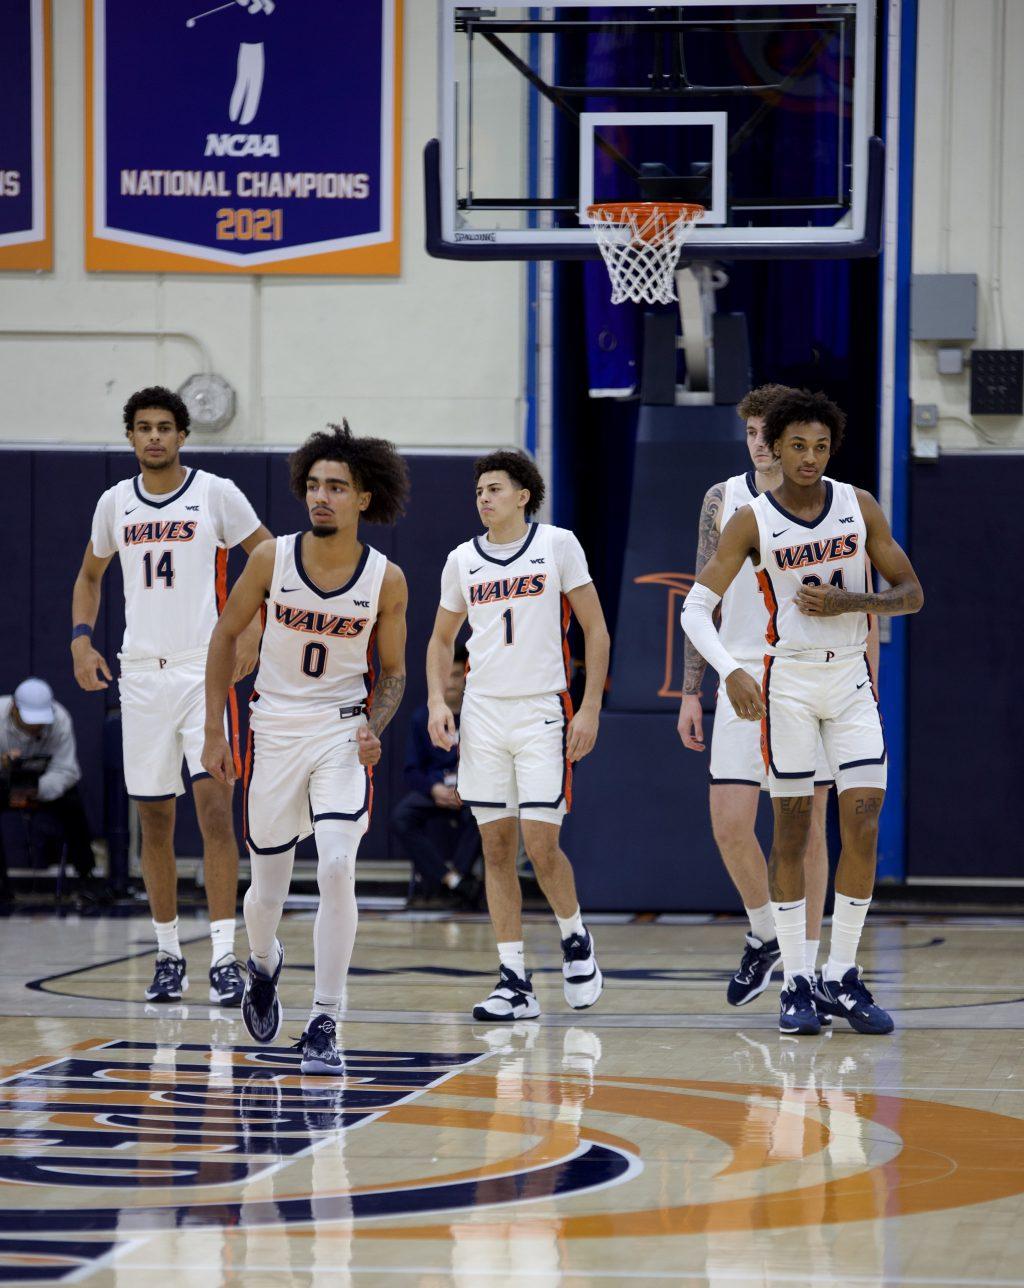 Pepperdine Men's Basketball starters trot on the court versus Rice University on Nov. 7 at Firestone Fieldhouse. Lewis said the Pepperdine coaching staff allowed him to make mistakes his first year, and he's sharper now.